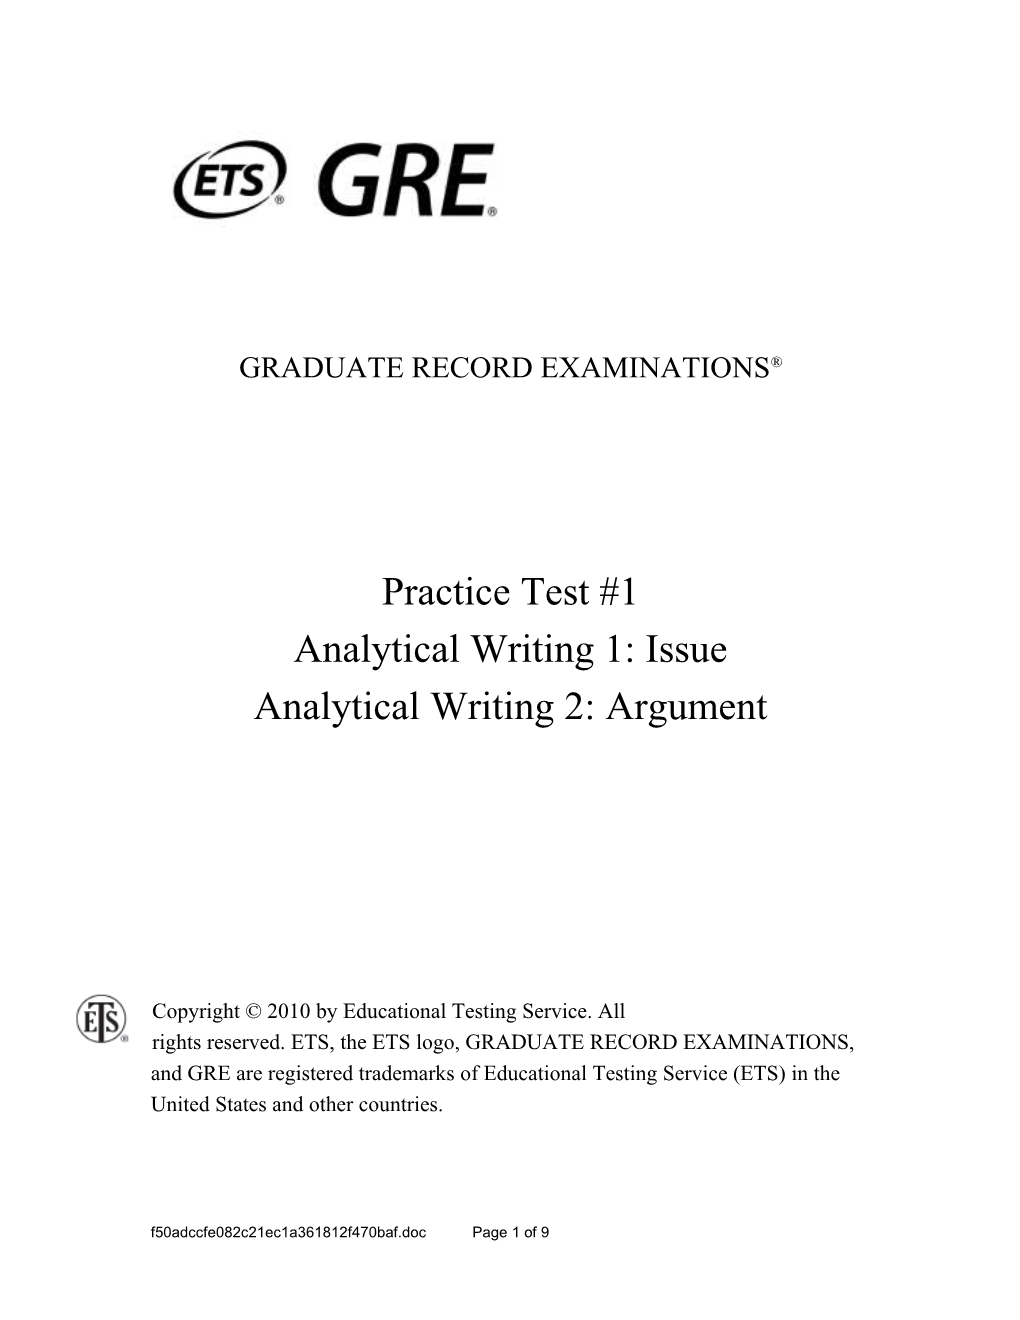 GRE Practice Test 1: Analytical Writing